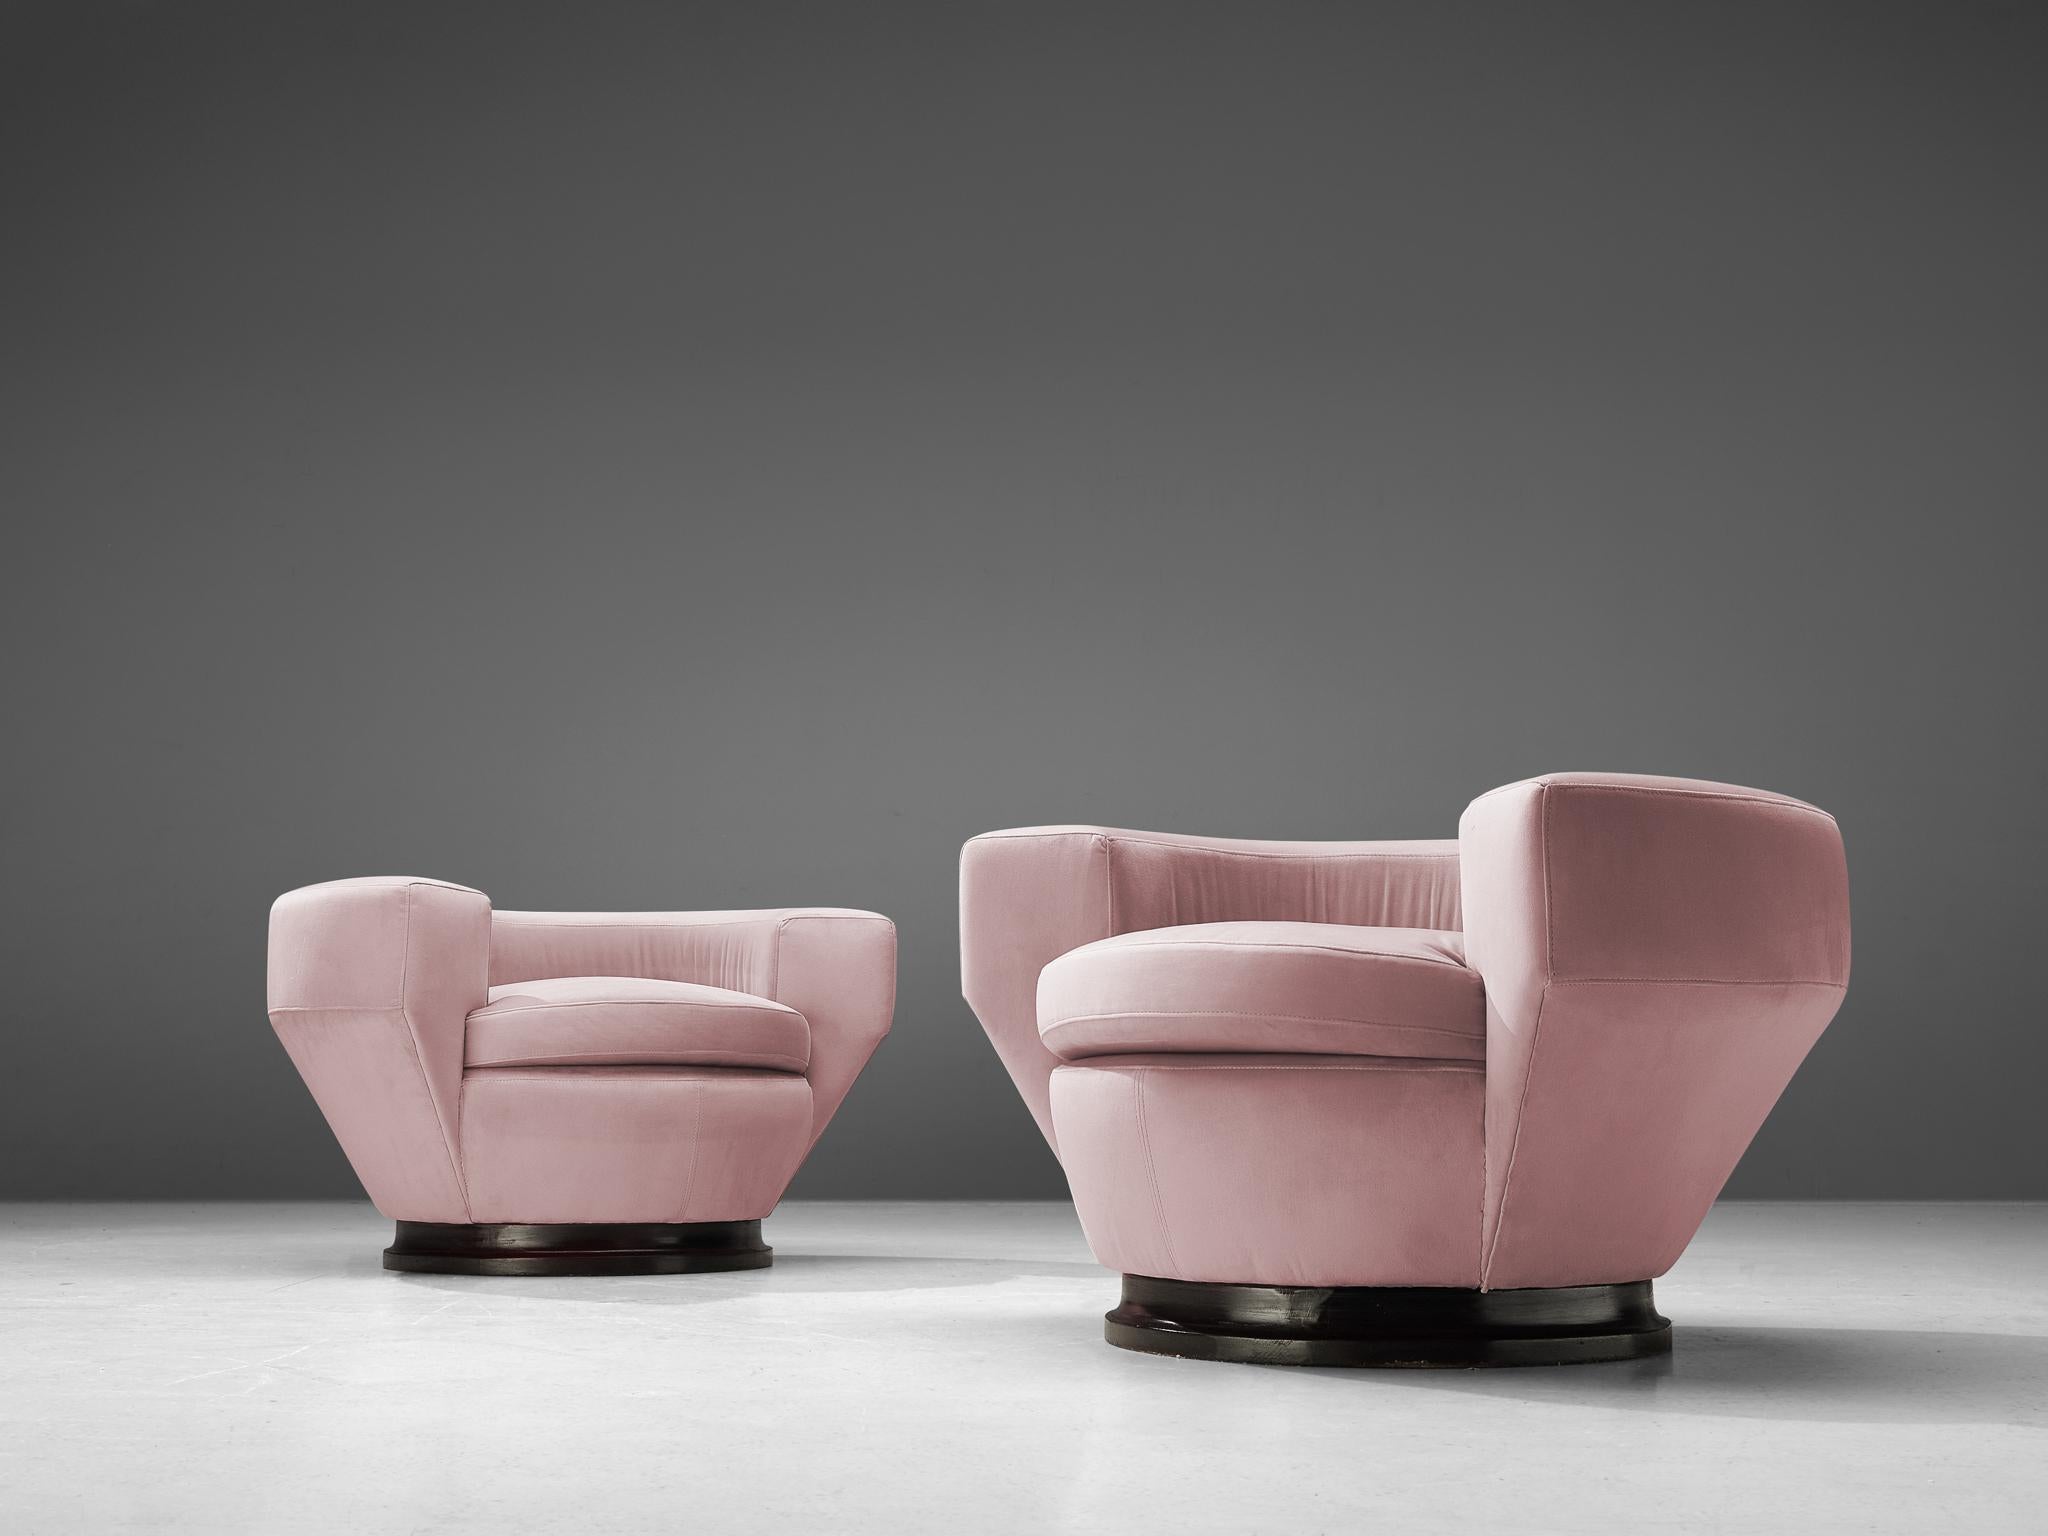 Pair of armchairs, pink ultra-suede upholstery, darkened wood, Italy, 1960s

Stunning pair of lounge chairs made in Italy in the 1960s. Remarkable about these armchairs is their round shape and the low backrest that merges seamlessly into the